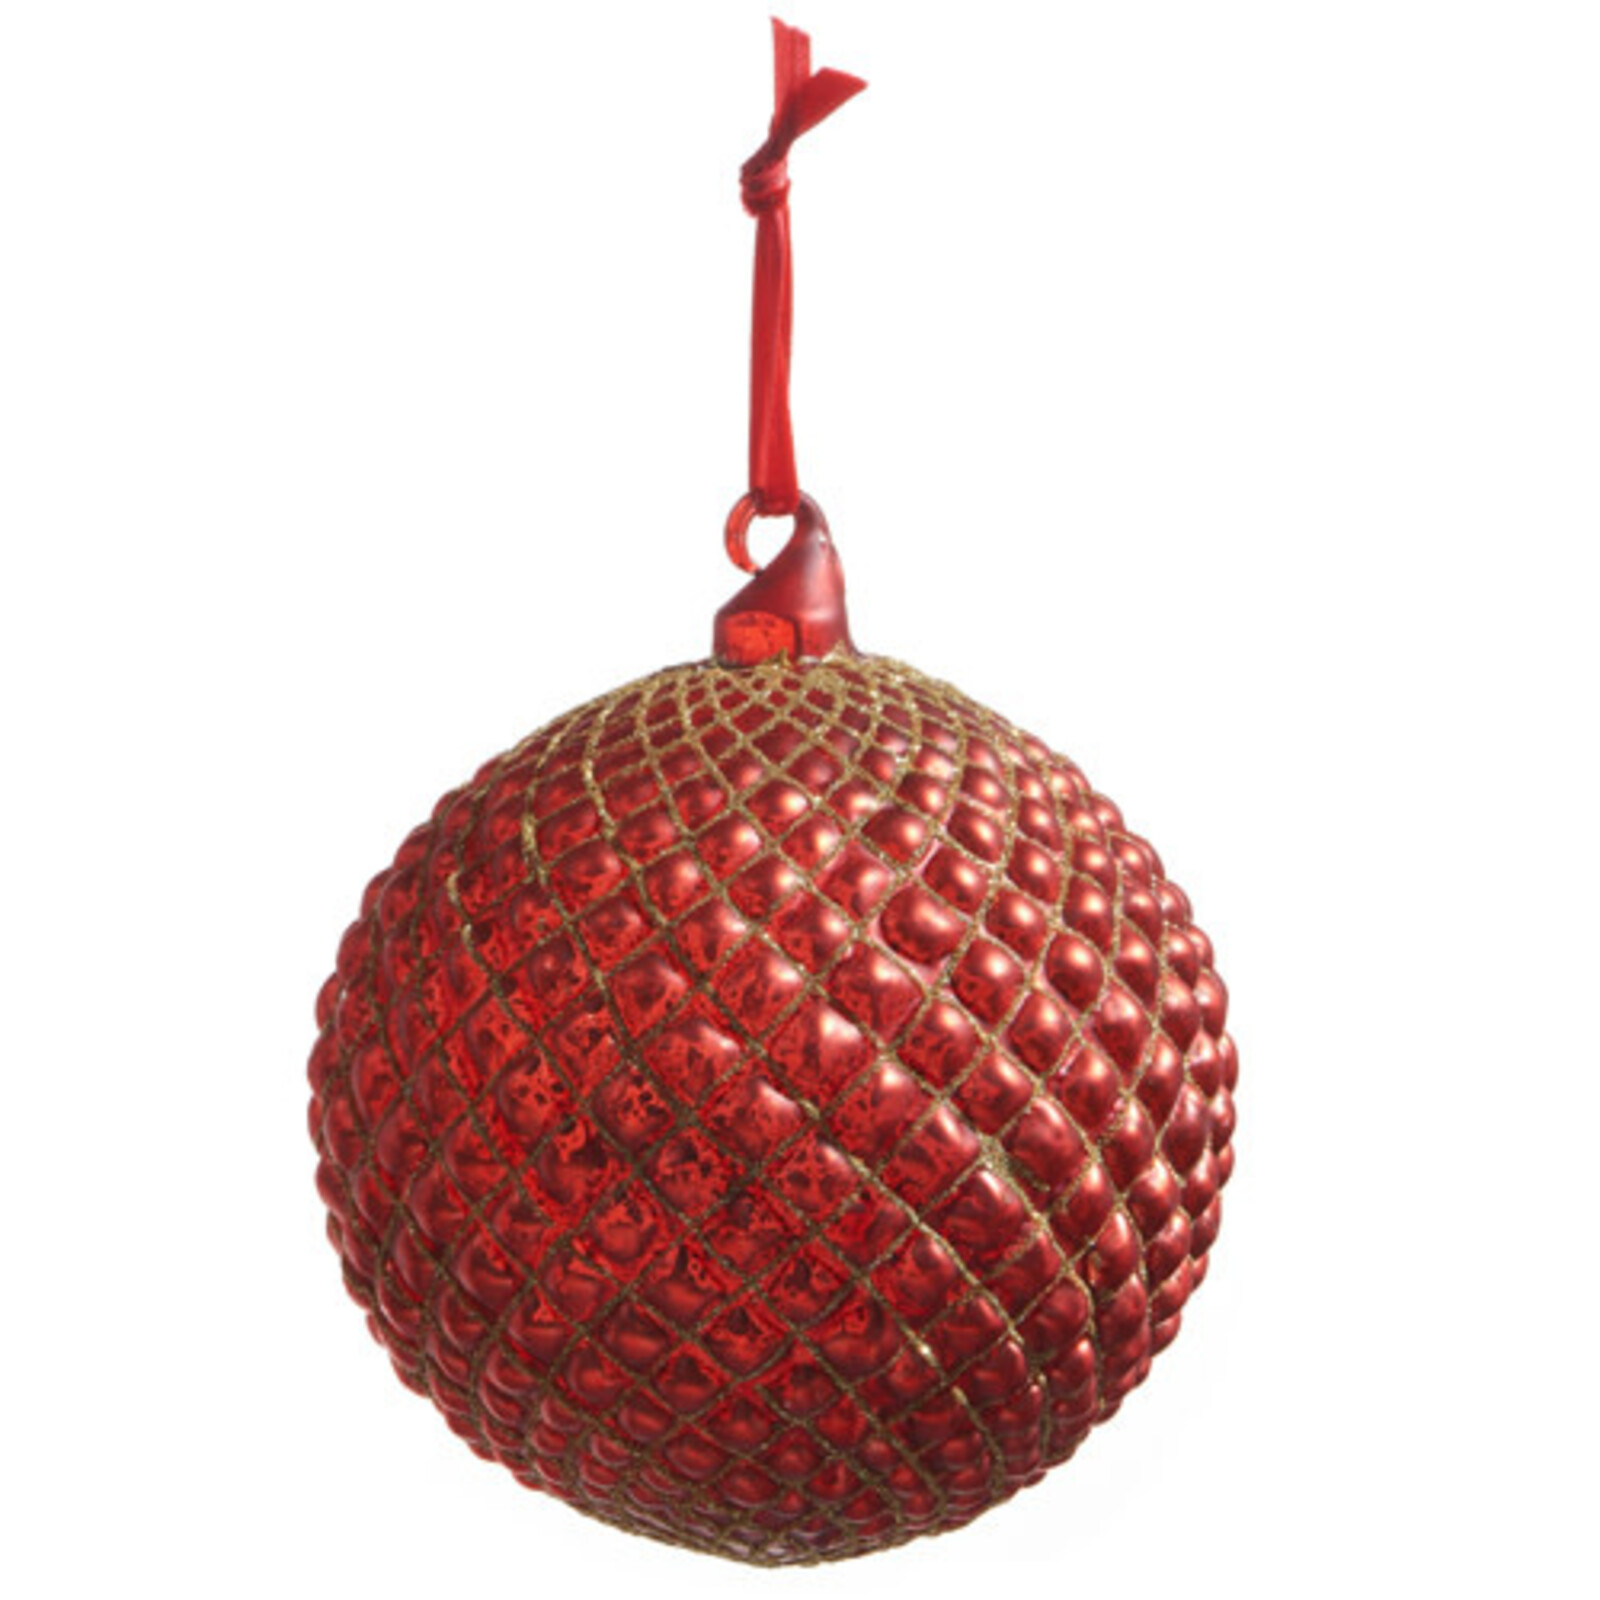 RAZ Imports Inc. 6" RED QUILTED BALL ORNAMENT 4322915 loading=